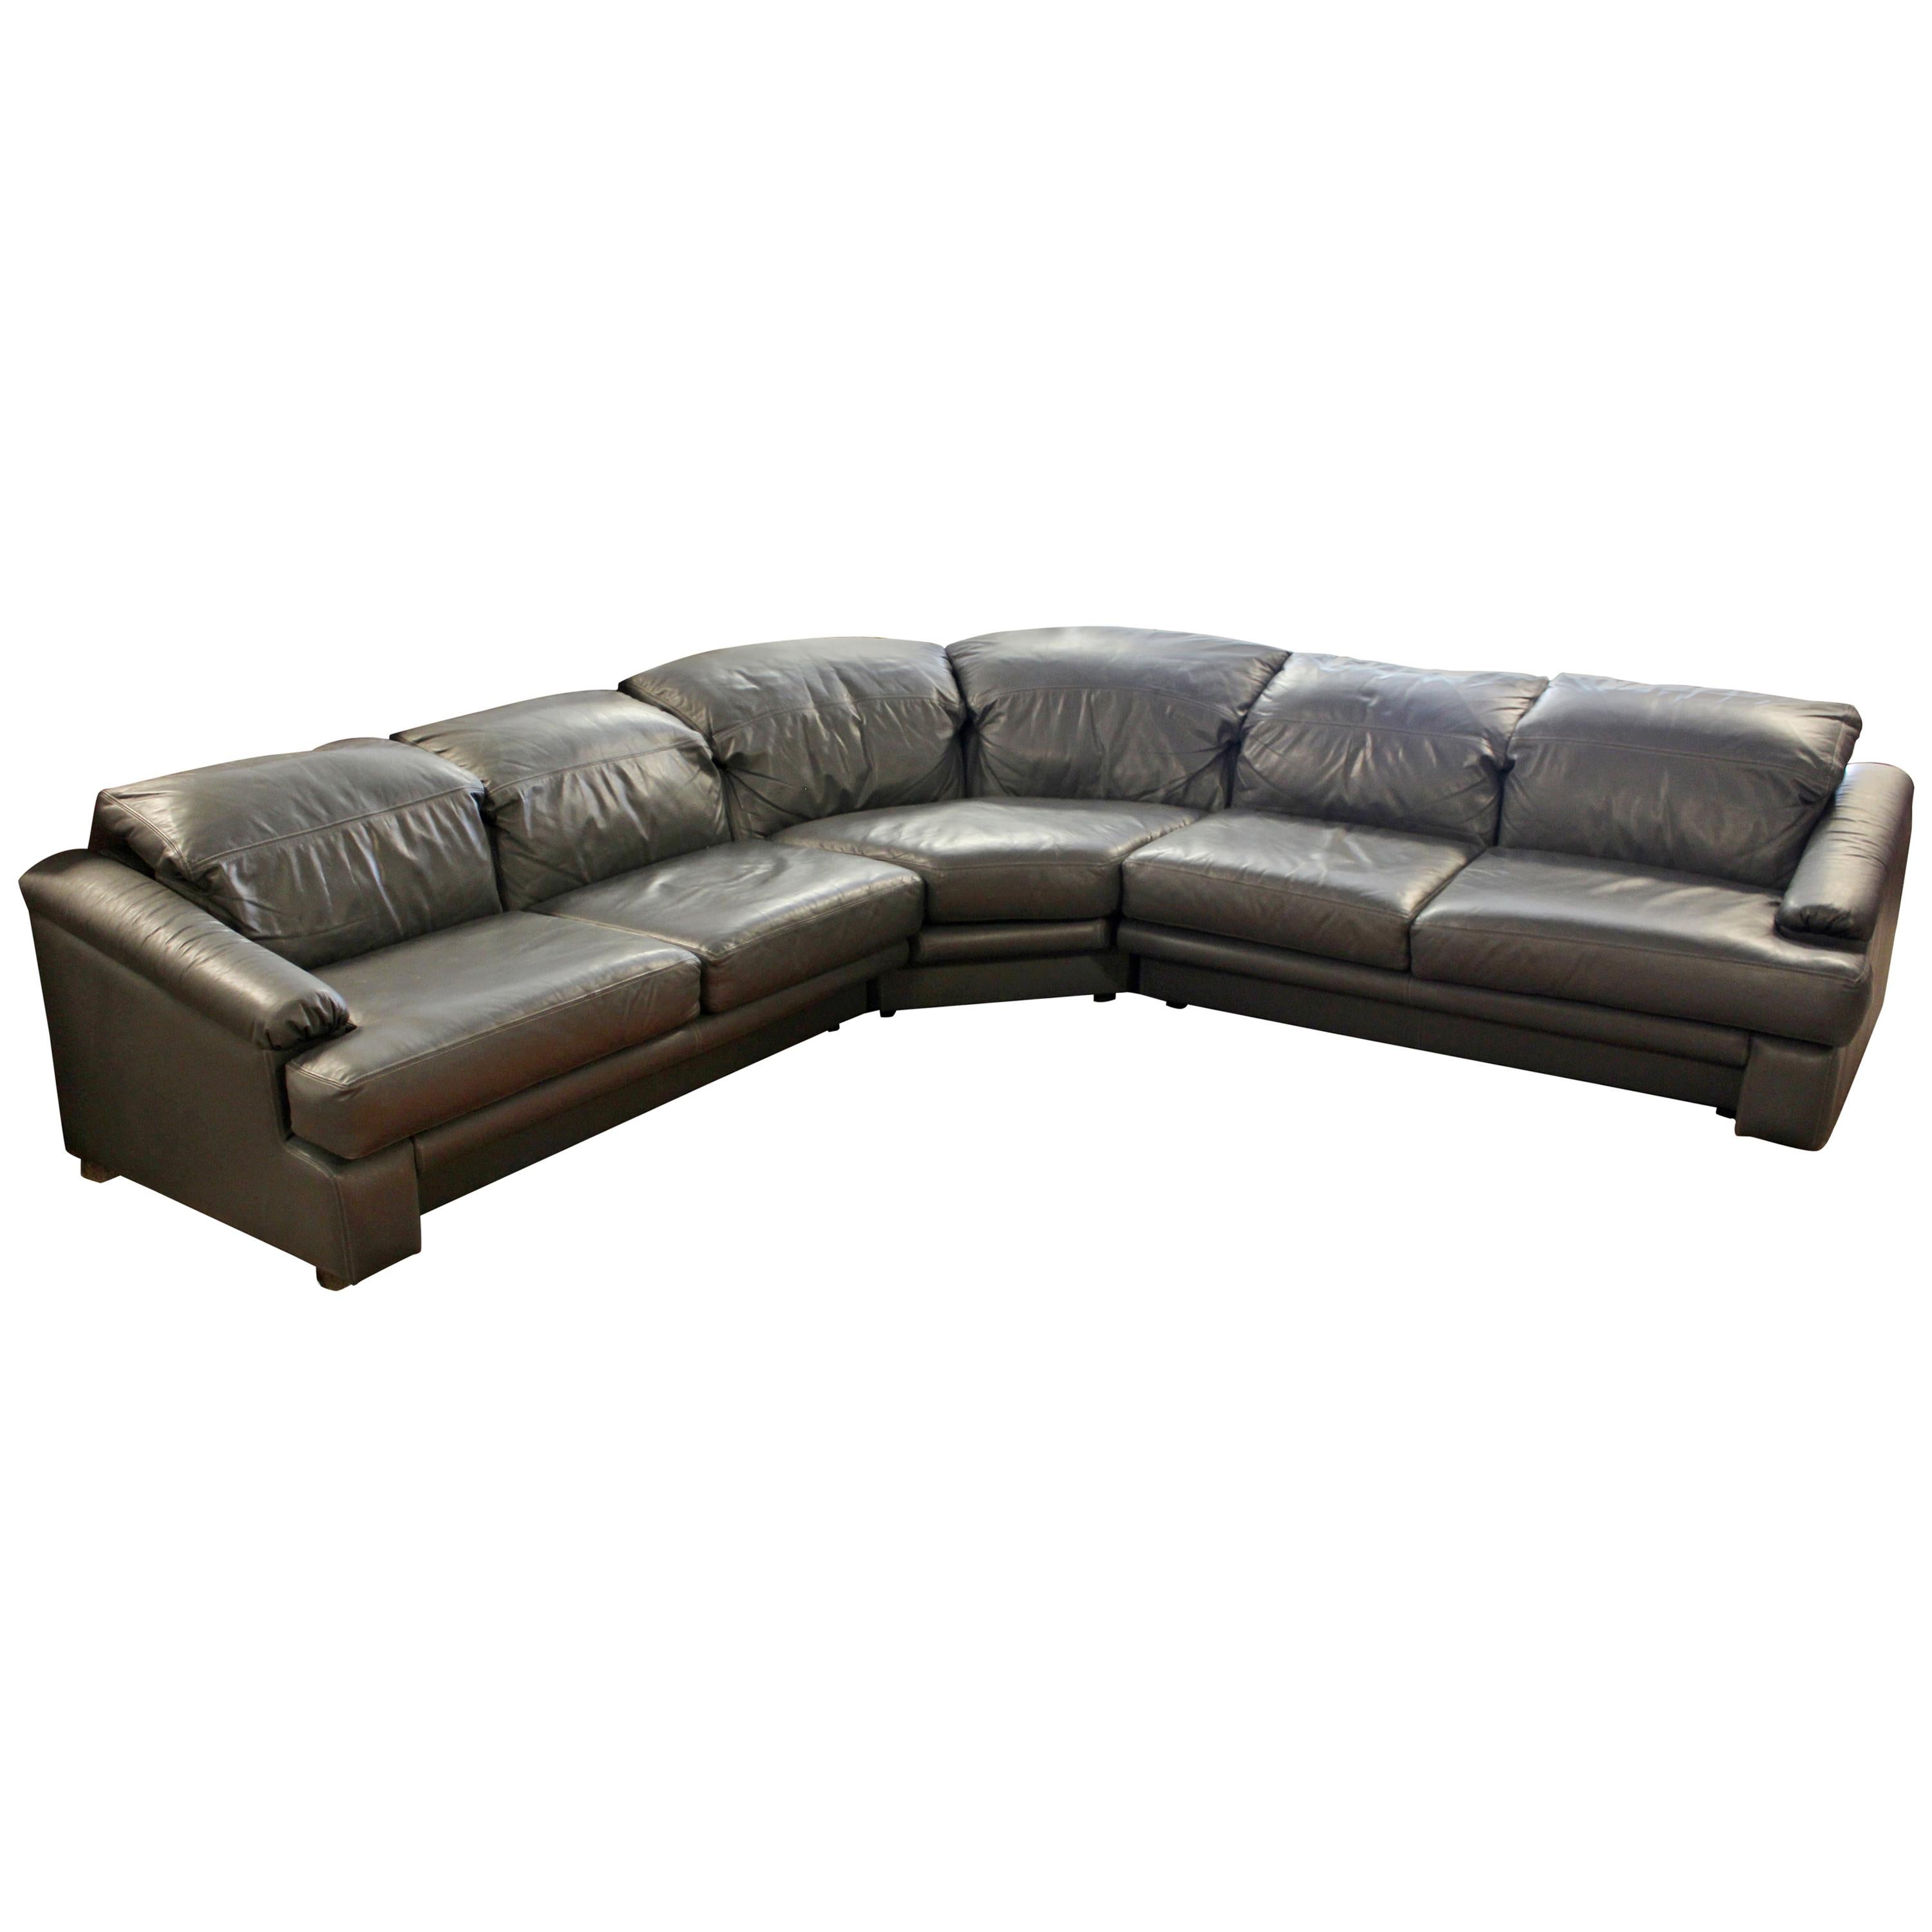 Contemporary Modern Preview 3-Piece Sectional Sofa, 1980s